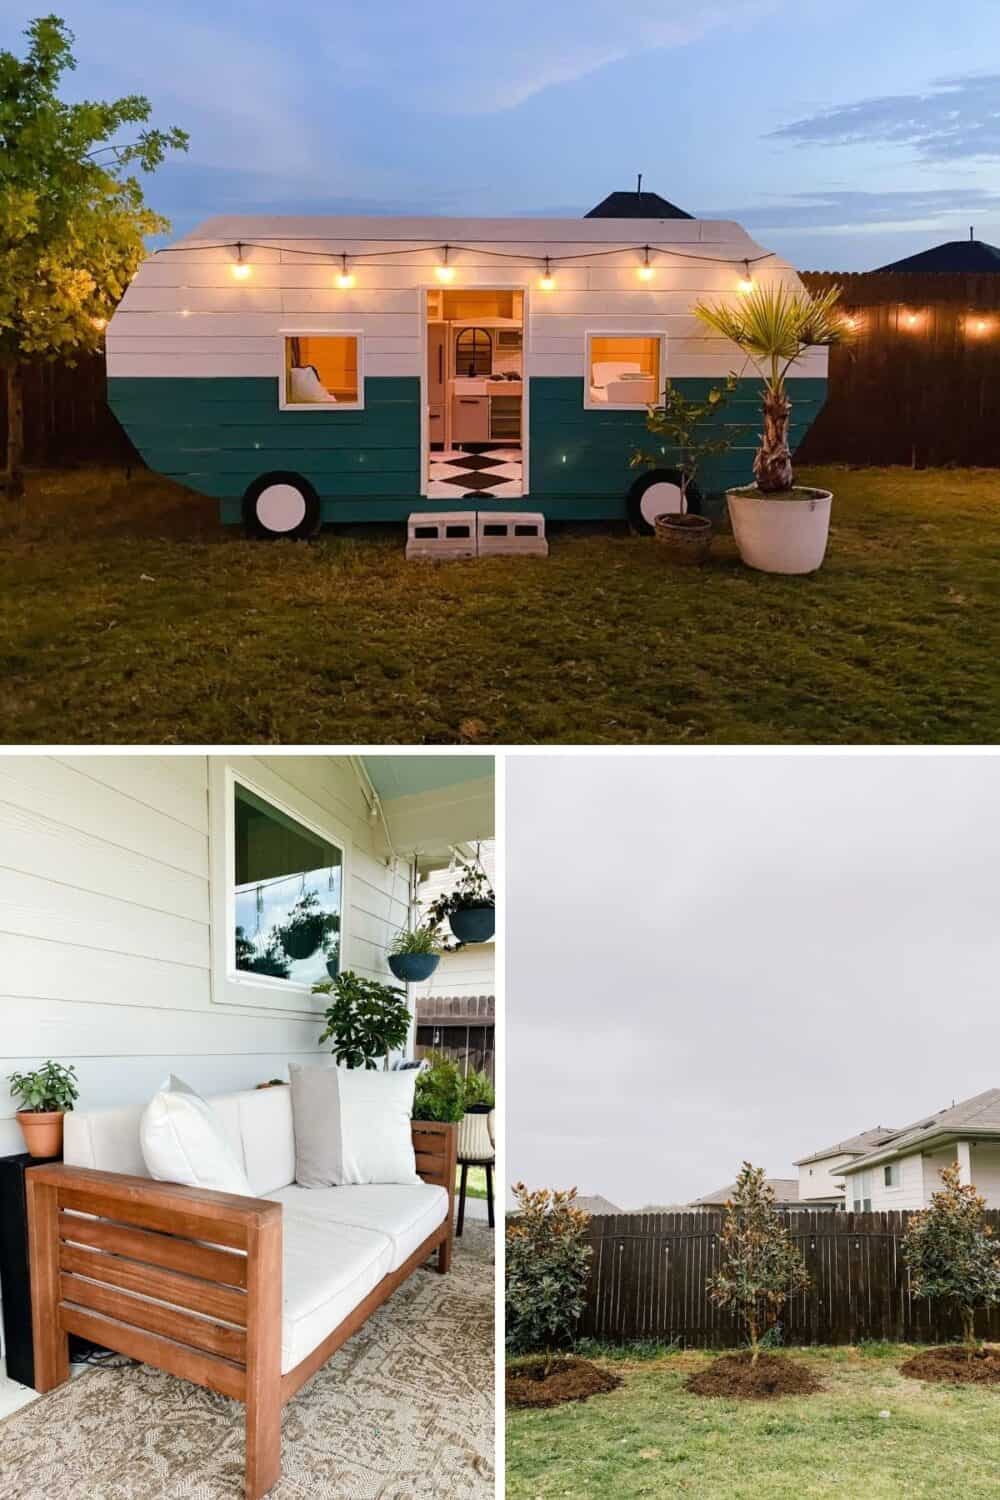 Collage of three exterior home photos, including a playhouse camper and a patio